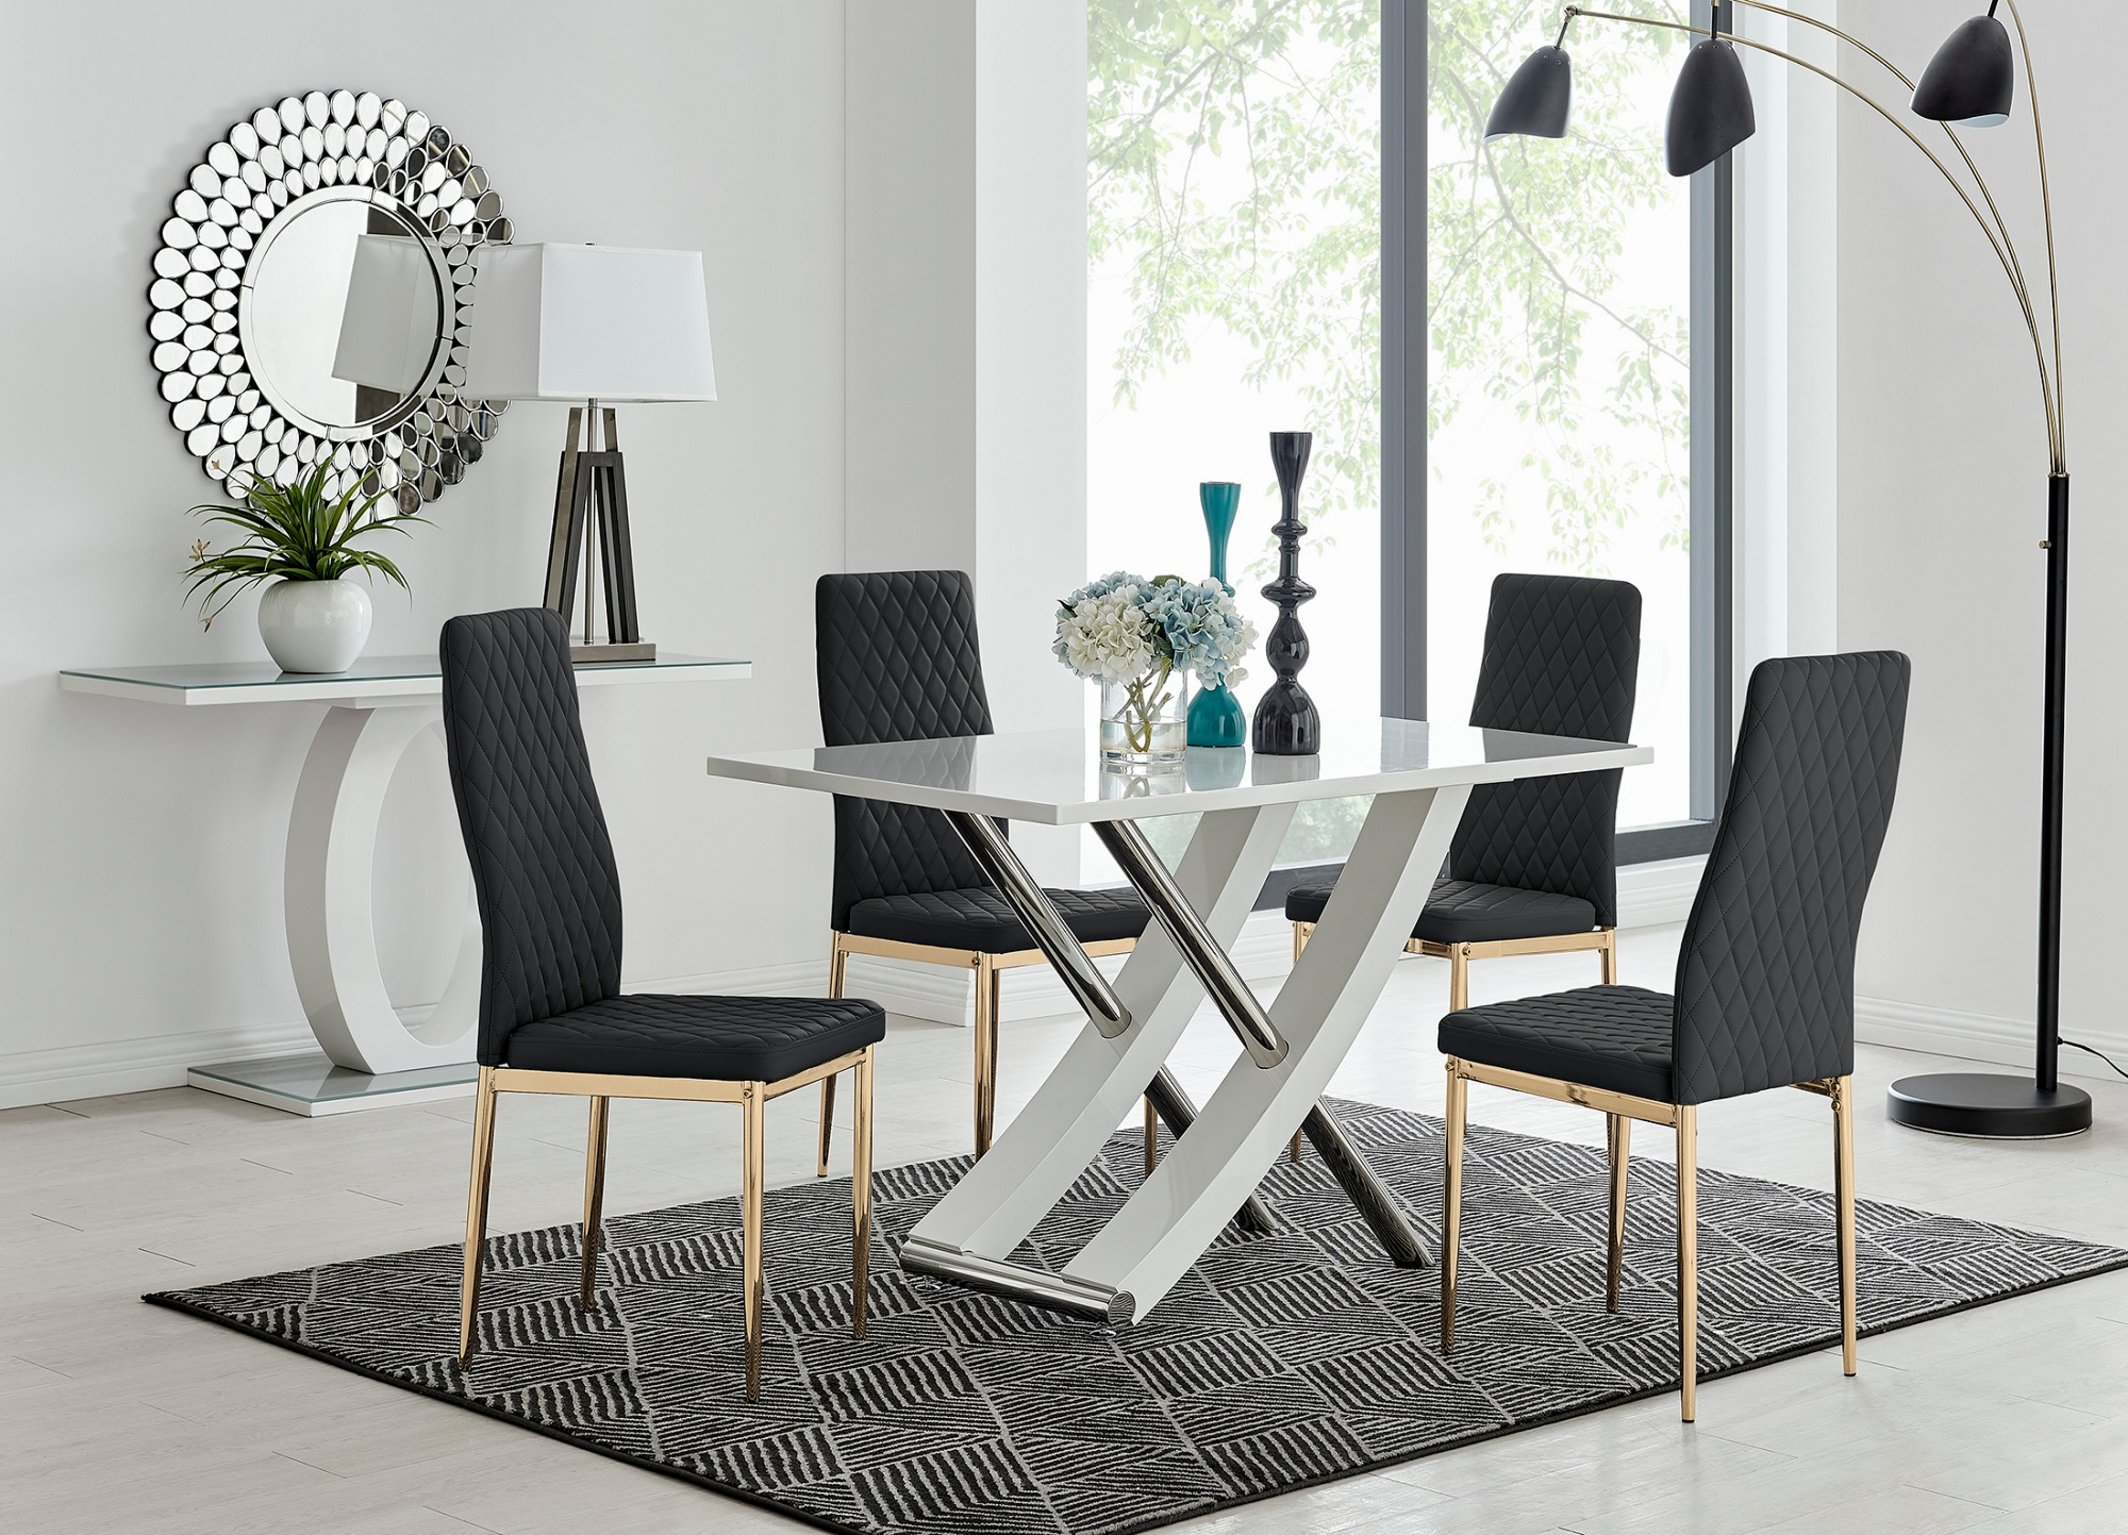 Furniturebox UK Monza 4 Seat White and Grey High Gloss Rectangular Dining Table Modern Contemporary Table Design with 4 Black Lorenzo Faux Leather Modern Dining Chairs